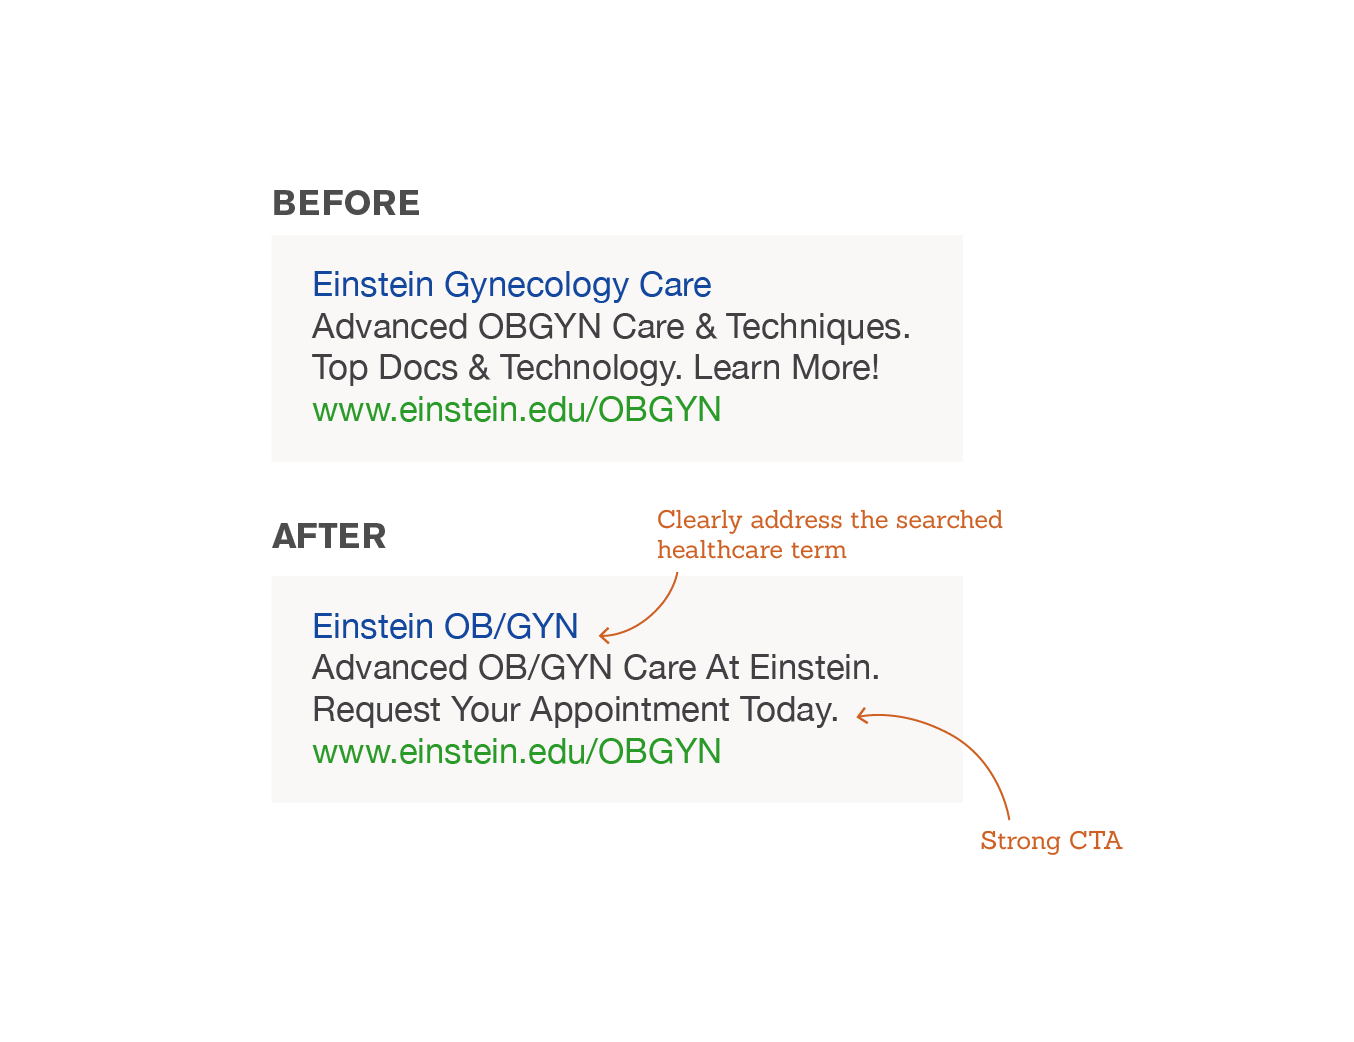 4before-after-einstein-ppc-ads-01-approach